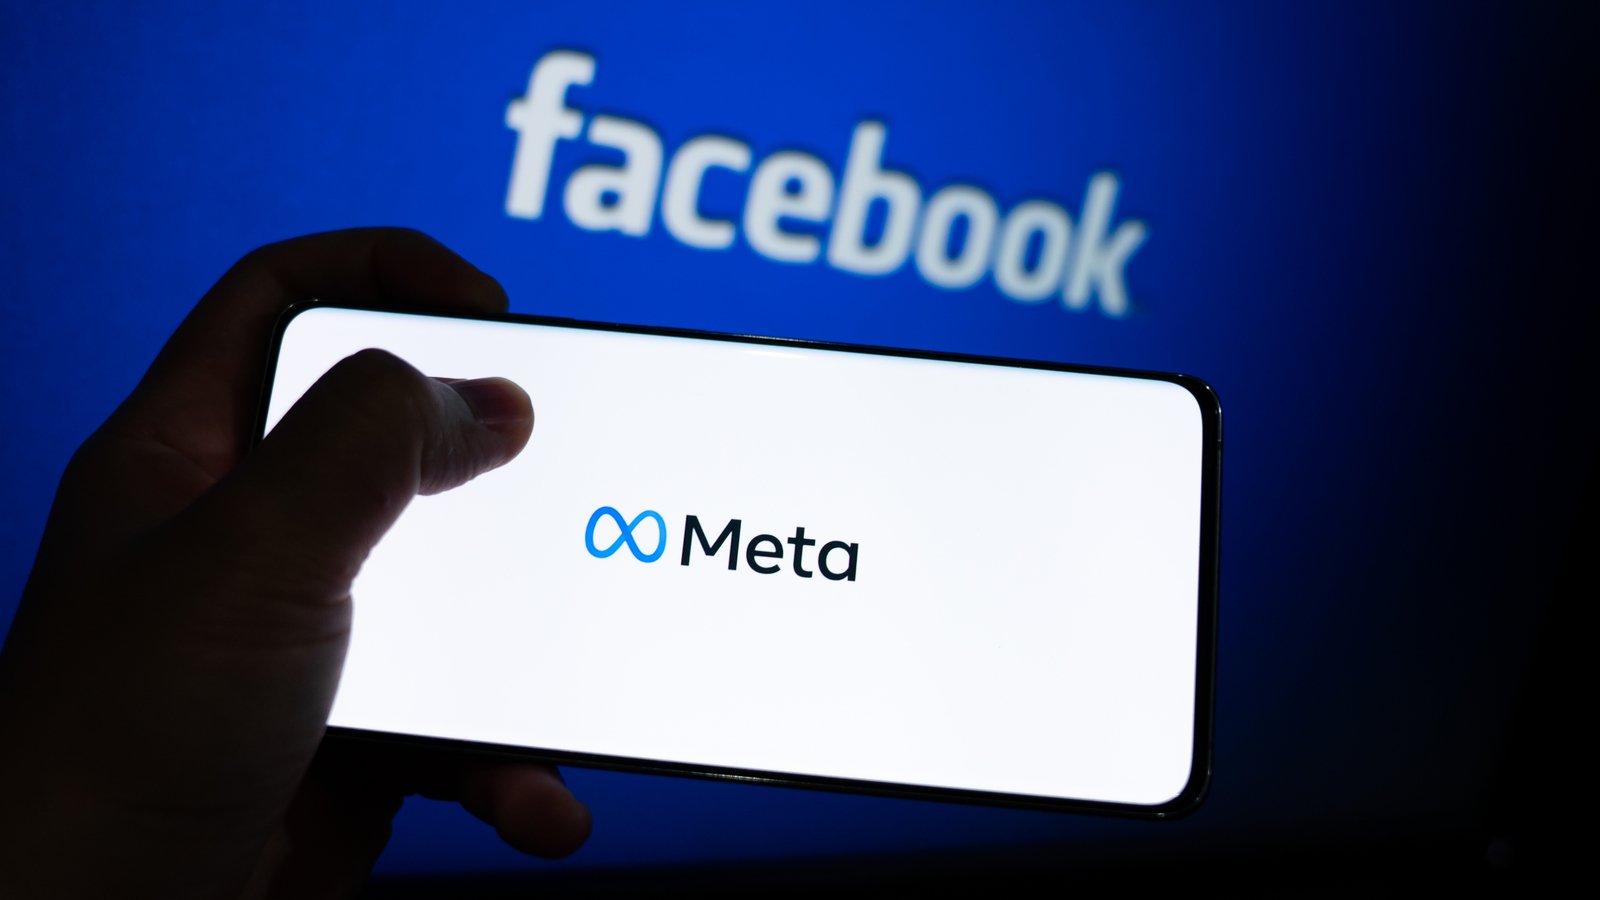 META stock logo is shown on a device screen. Meta is the new corporate name of Facebook representing Meta Platforms layoffs.